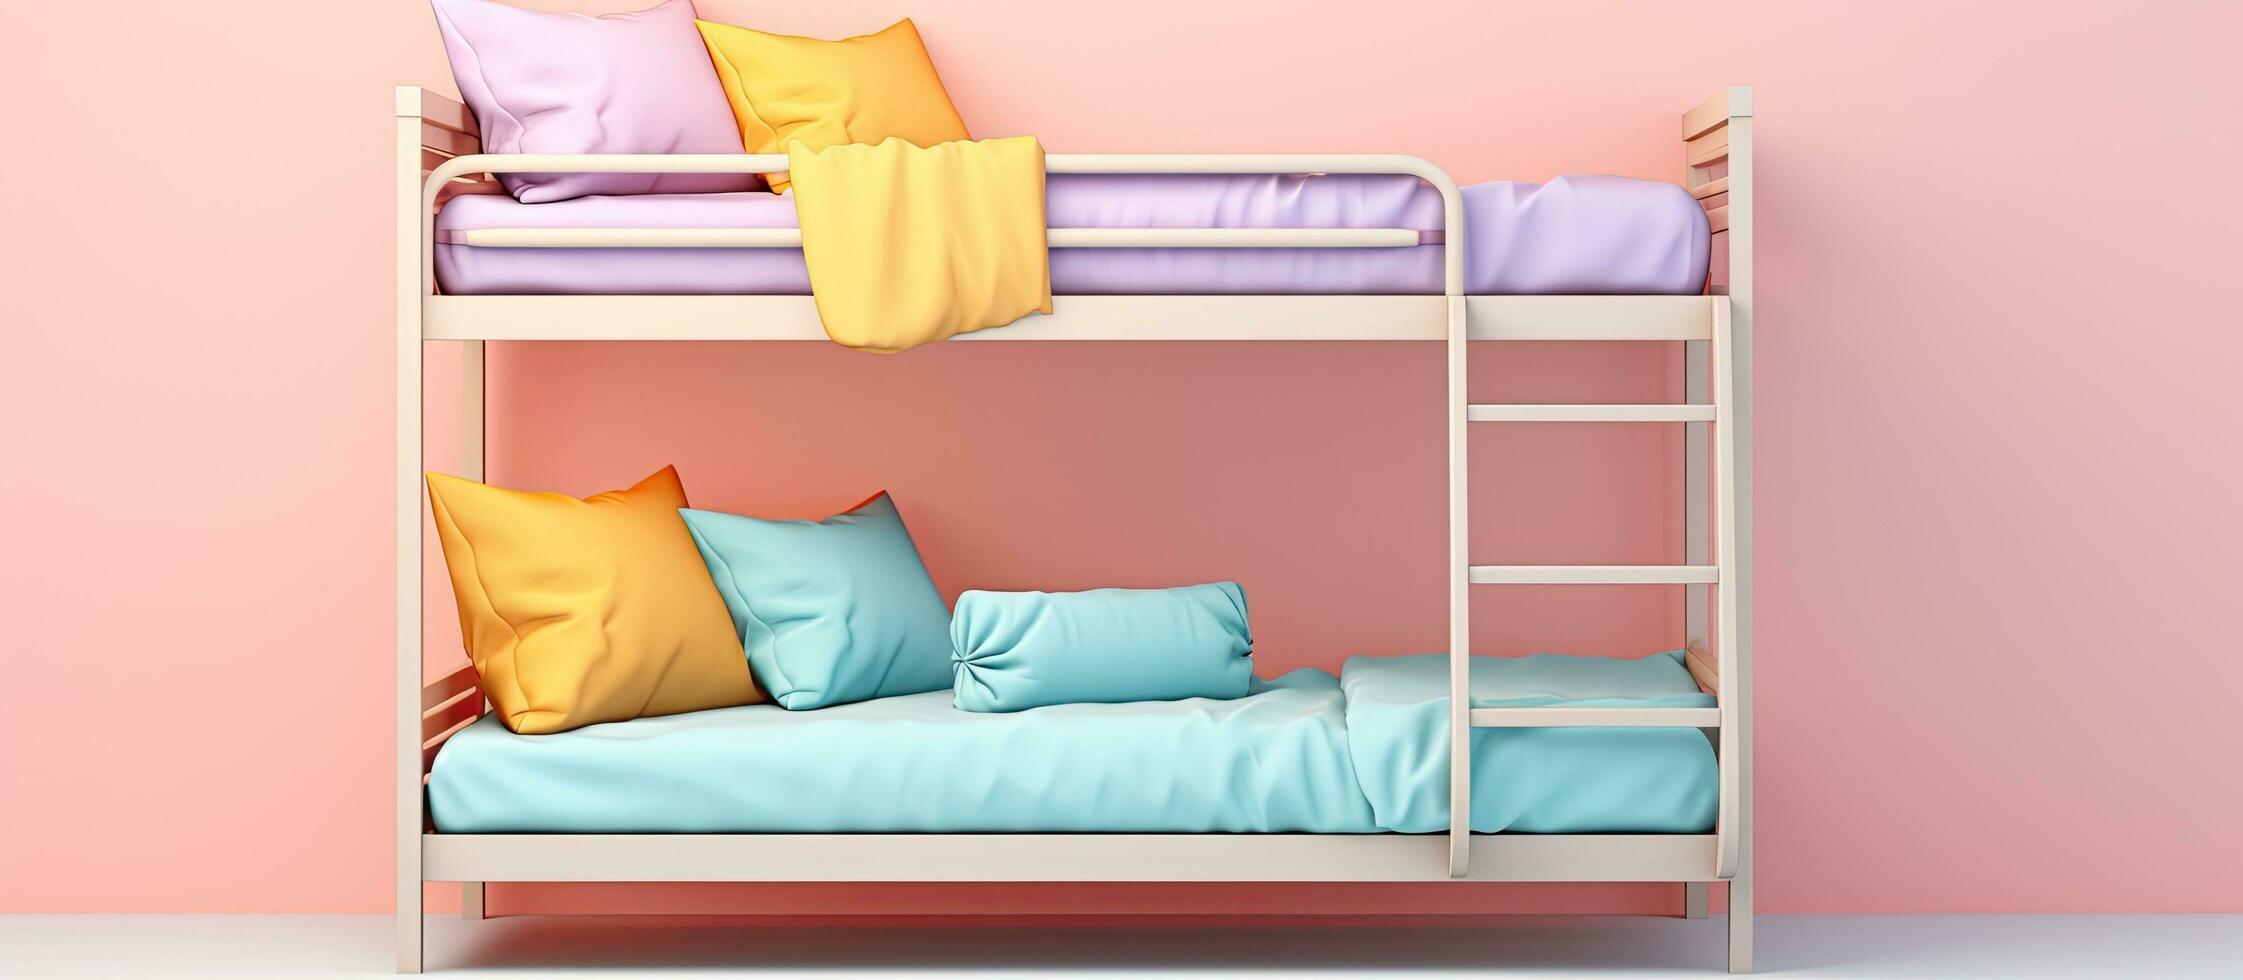 Photo of a pink bunk bed with fluffy pillows in a cozy room with copy space